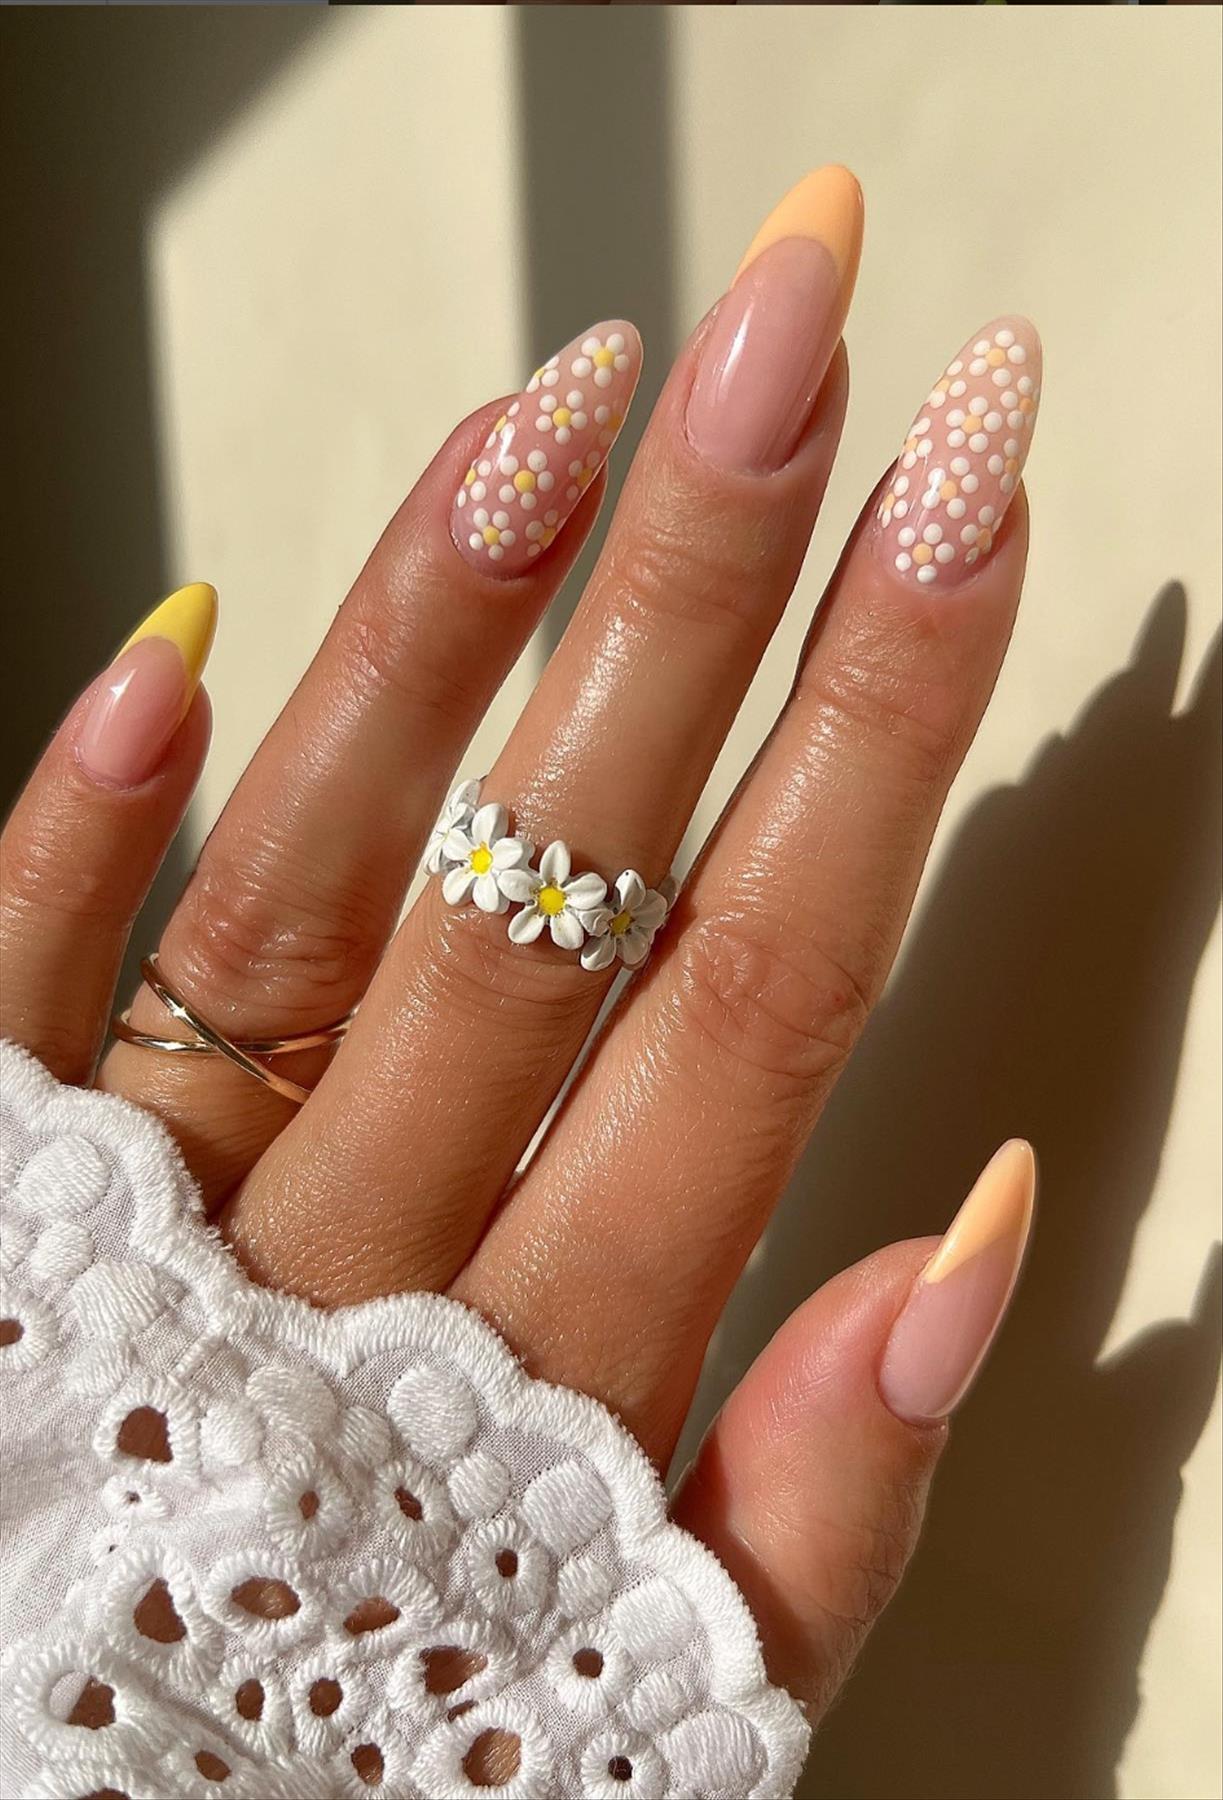 Beautiful Spring flower nails design you'll love